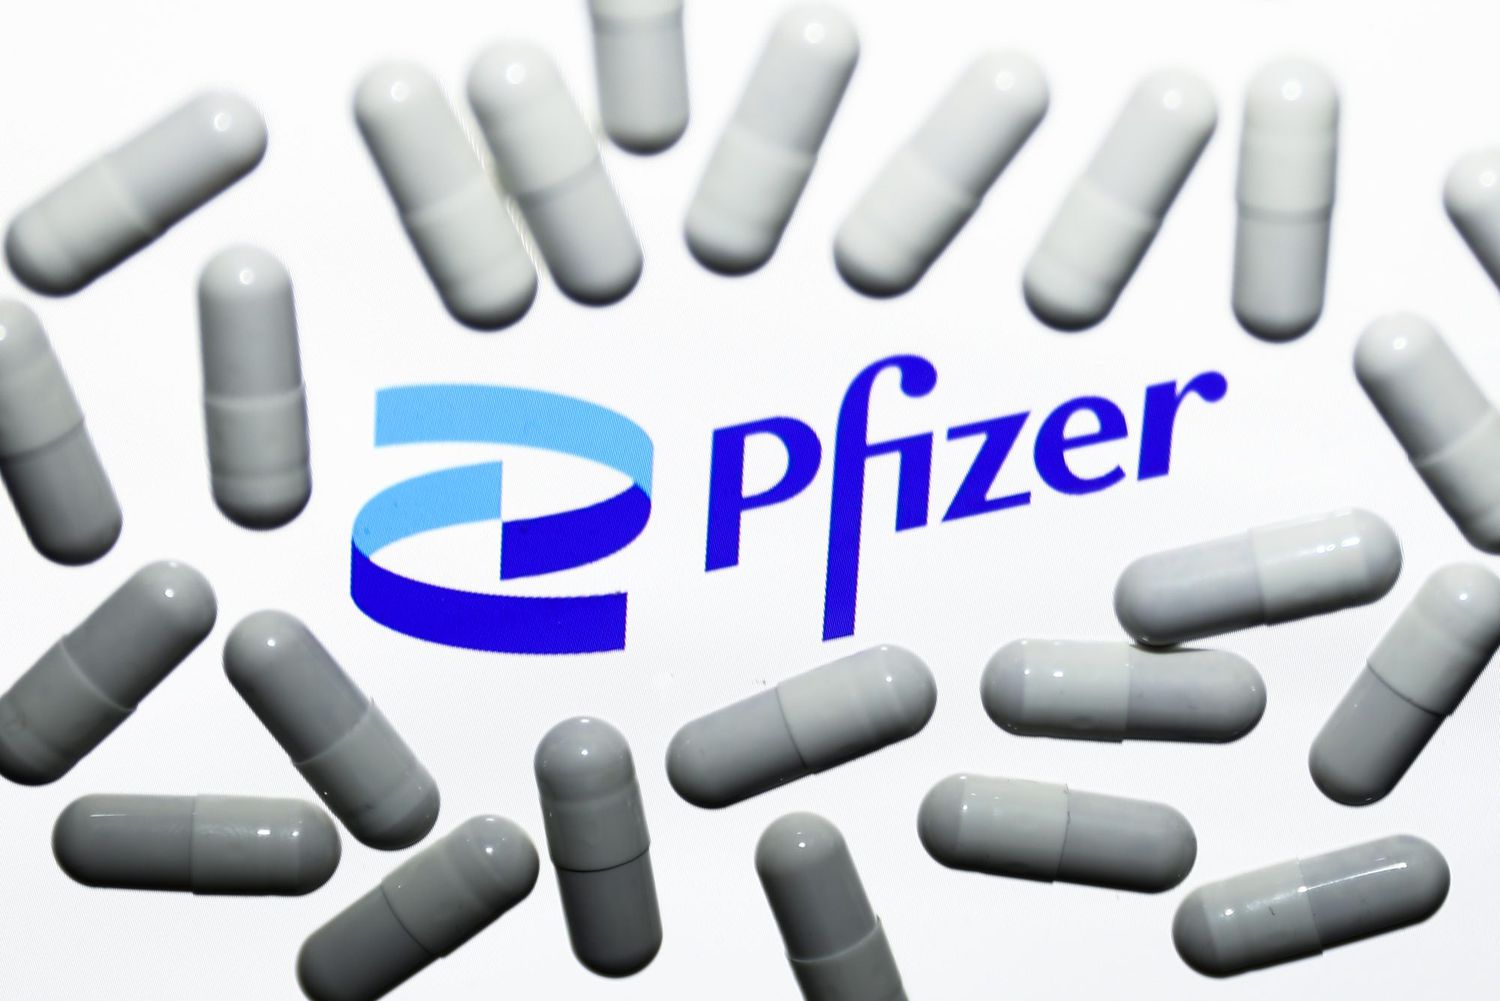 Pfizer pill Companies Working On Covid-19 Medication